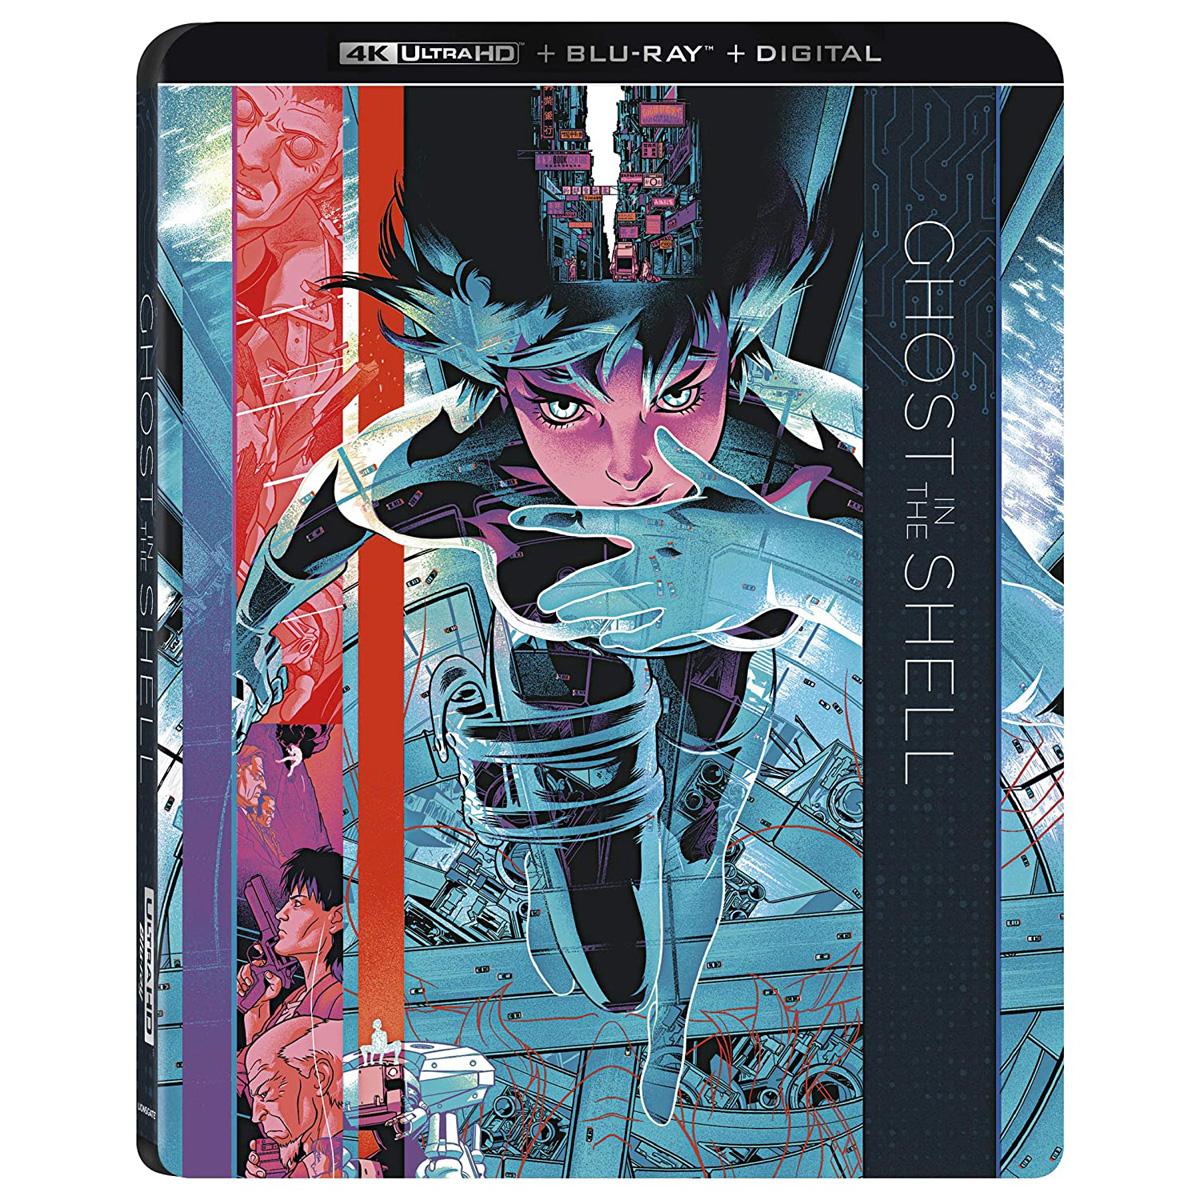 Ghost In the Shell 4K Blu-ray for $7.99